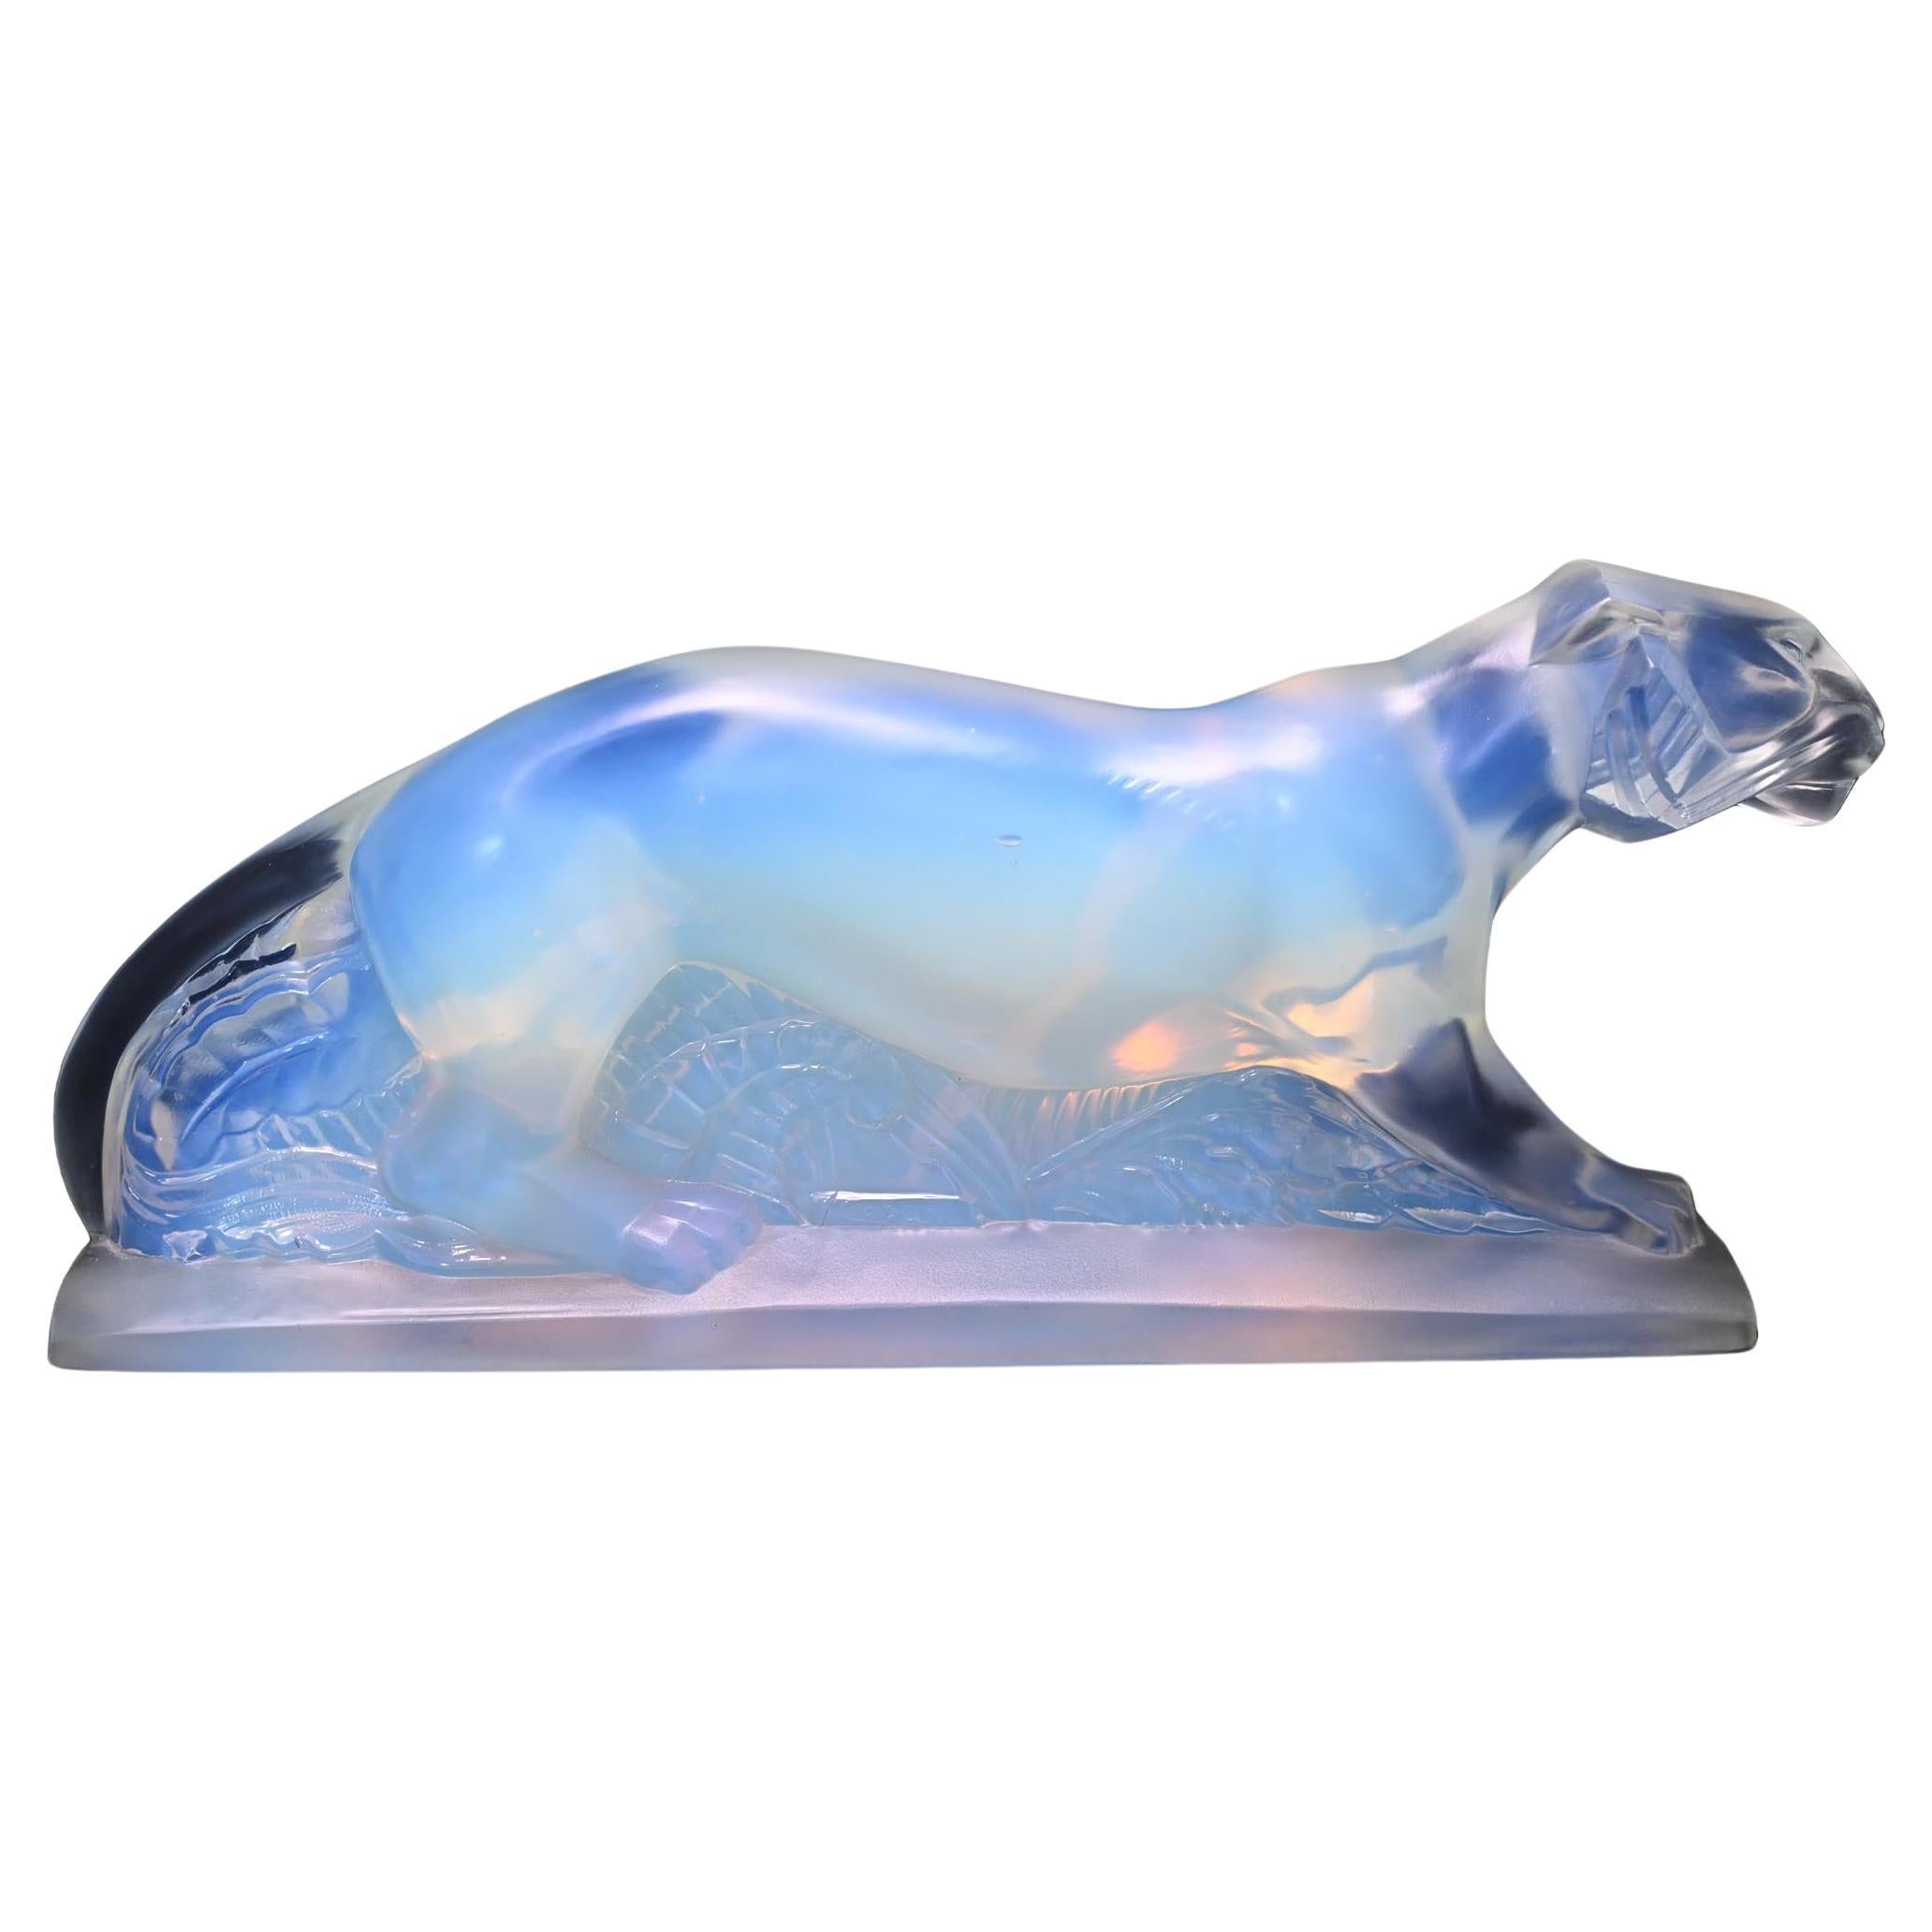 Opalescent glass sculpture of a Walking Tiger. For Sale